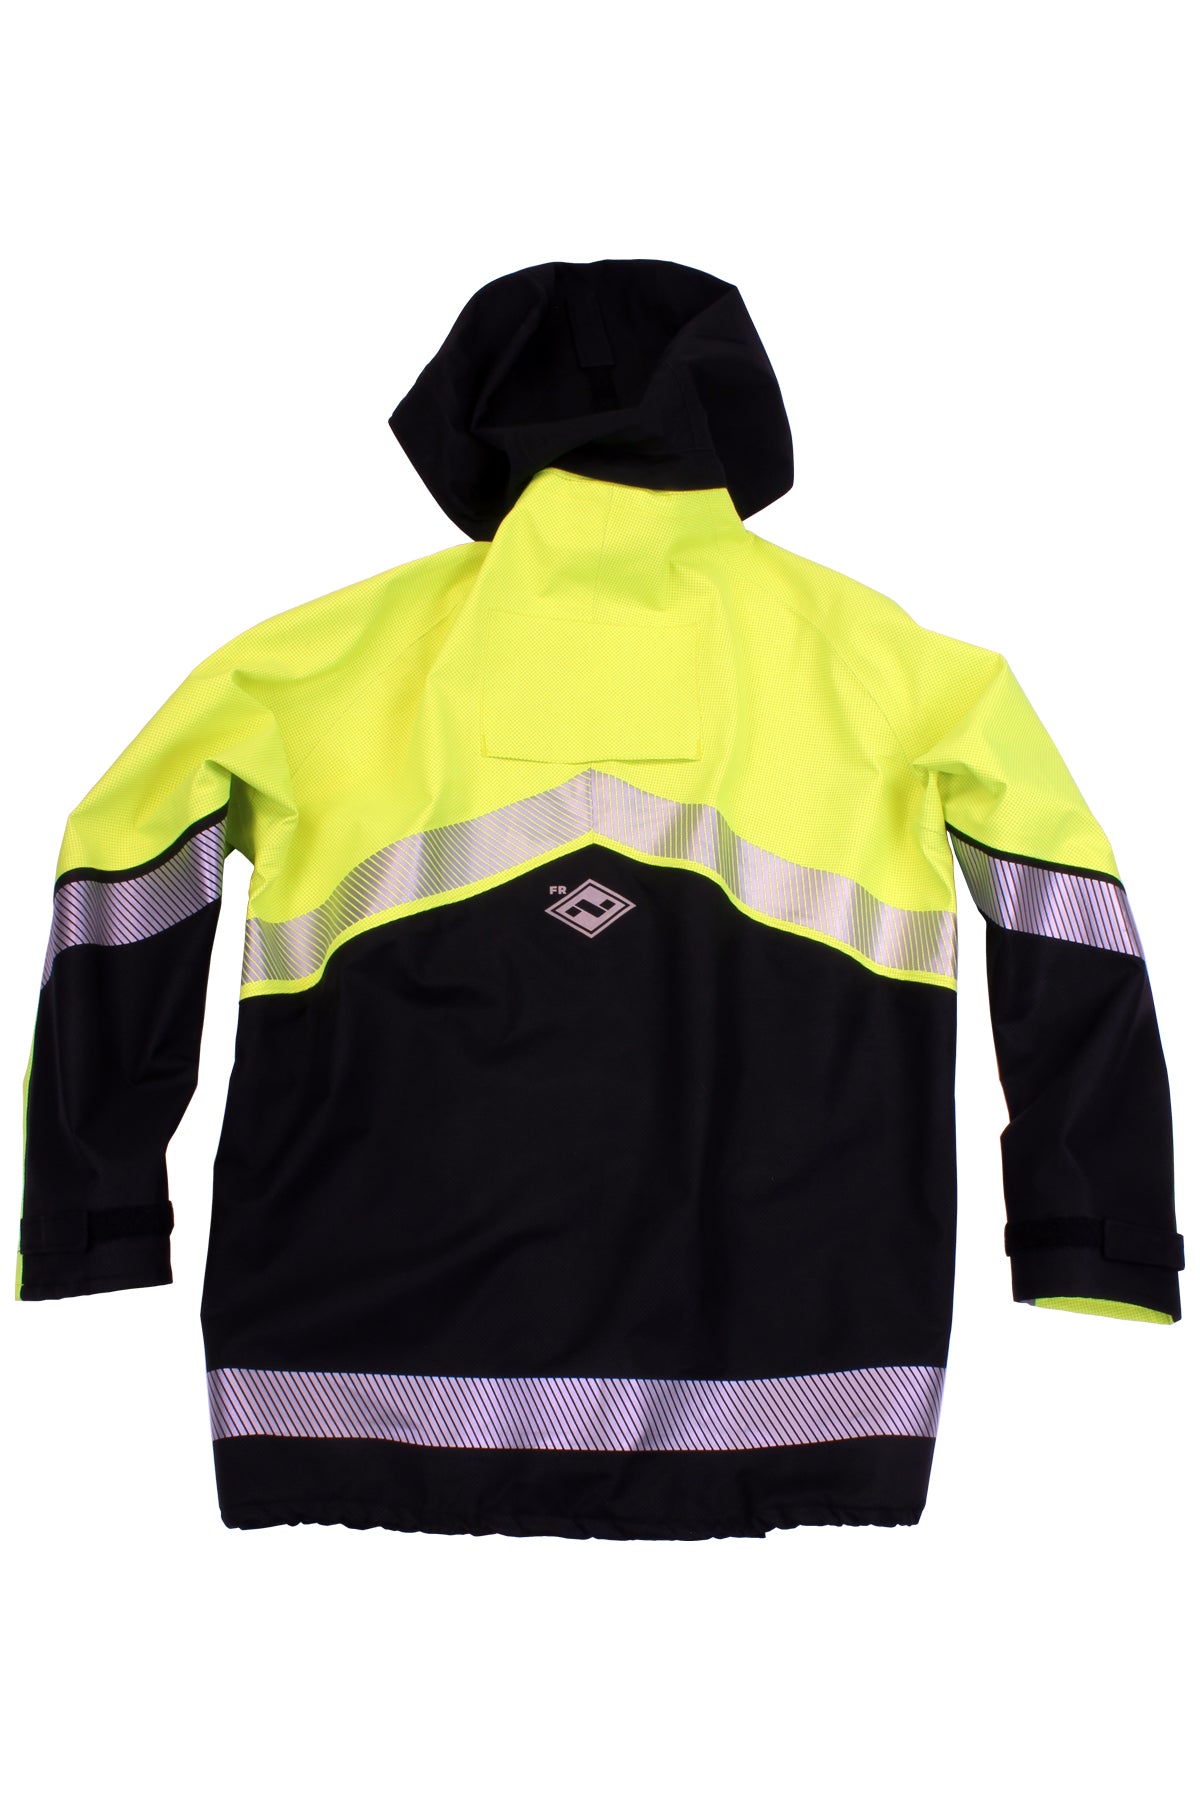 HydroLite FR 2.0 Extreme Weather Jacket- Type R Class 3